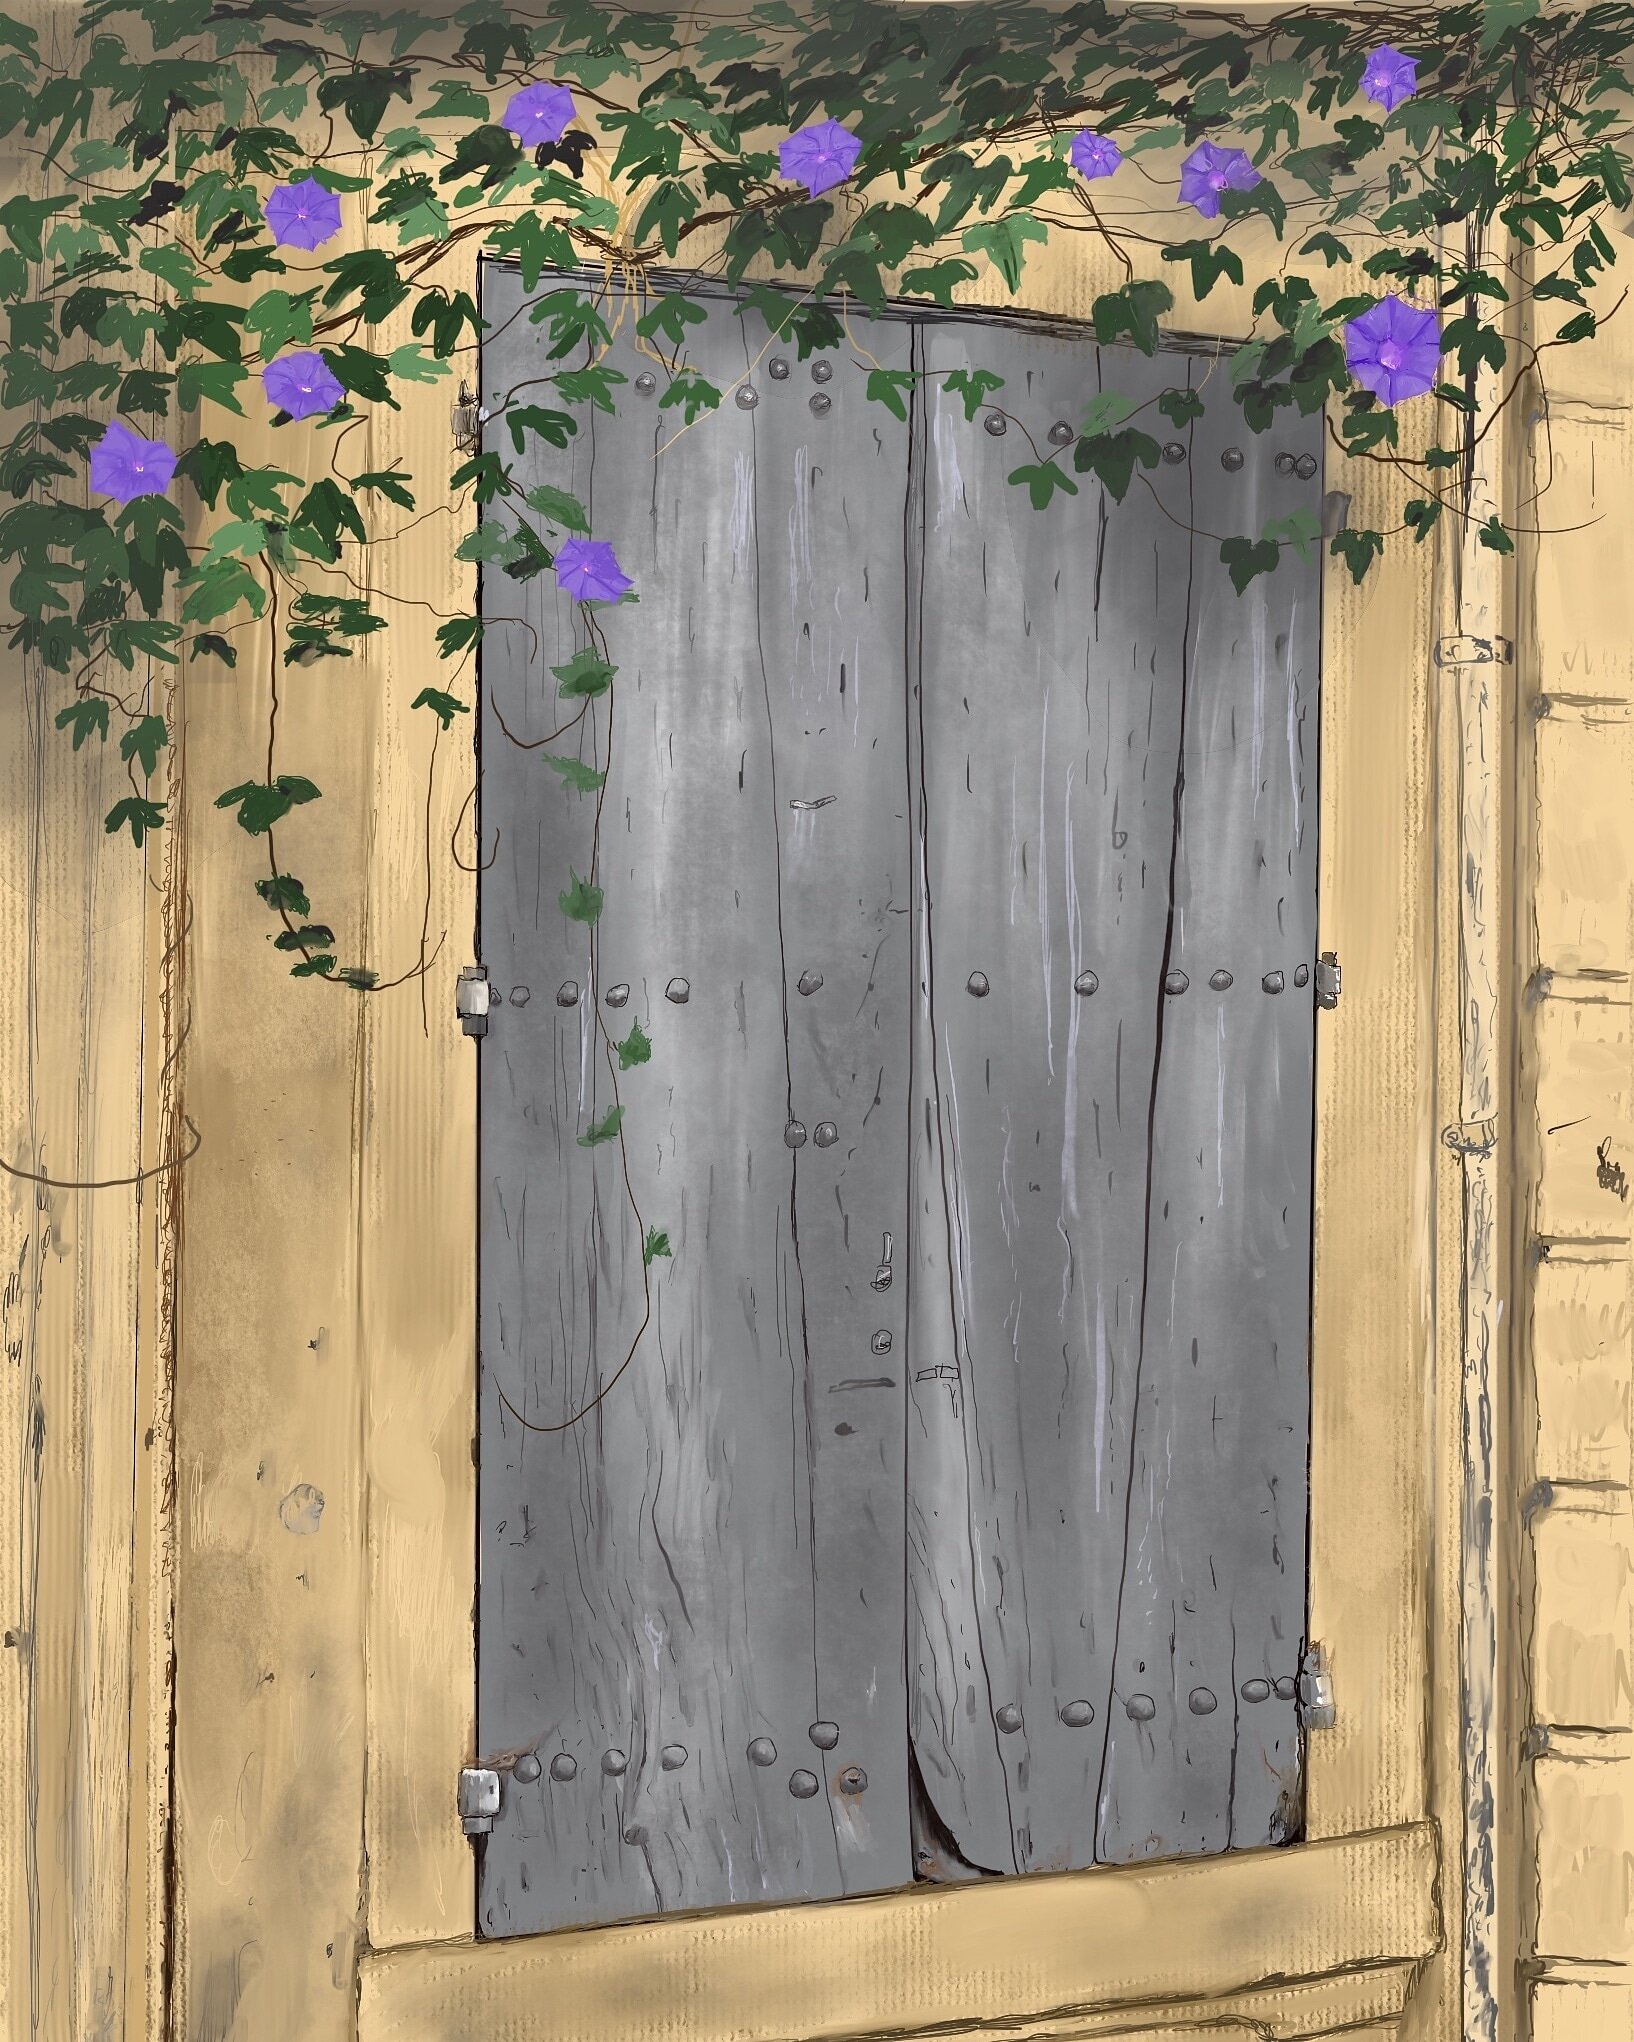 French Window 1; 2021, painted with Procreate